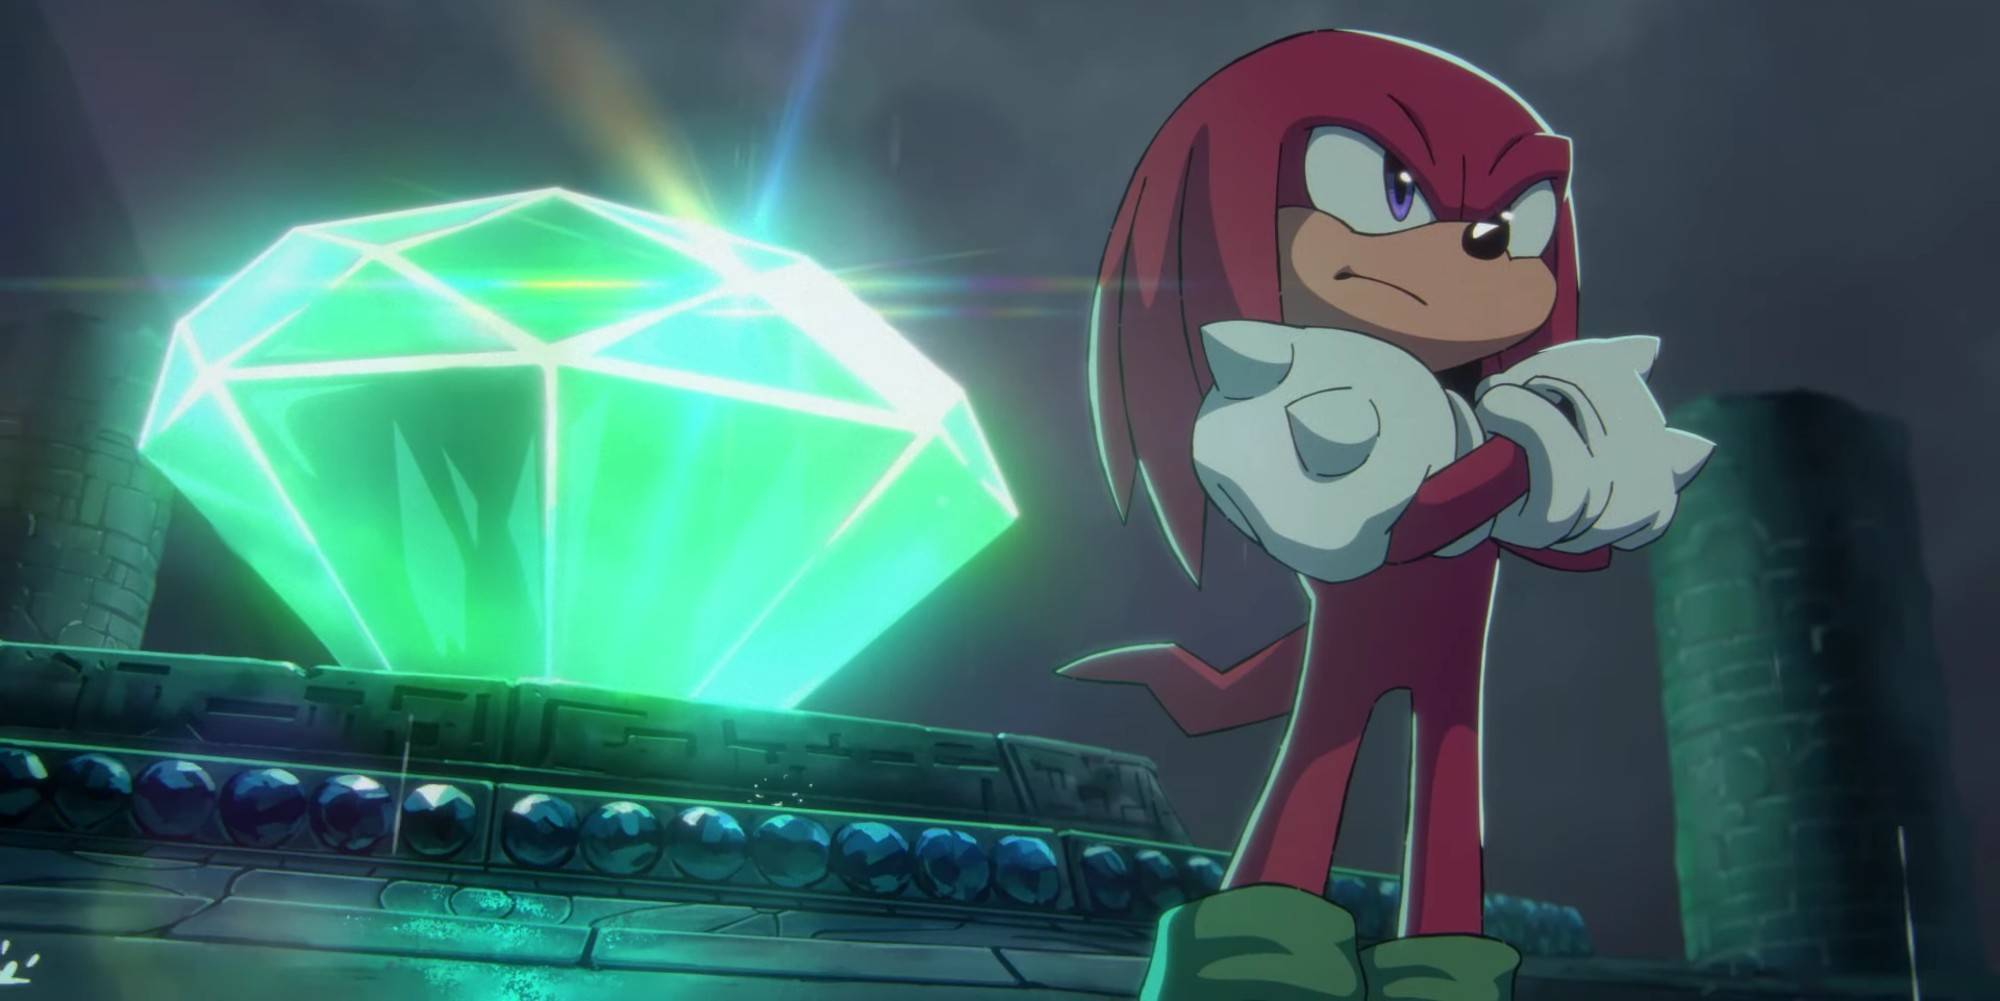 Knuckles the echidna anime